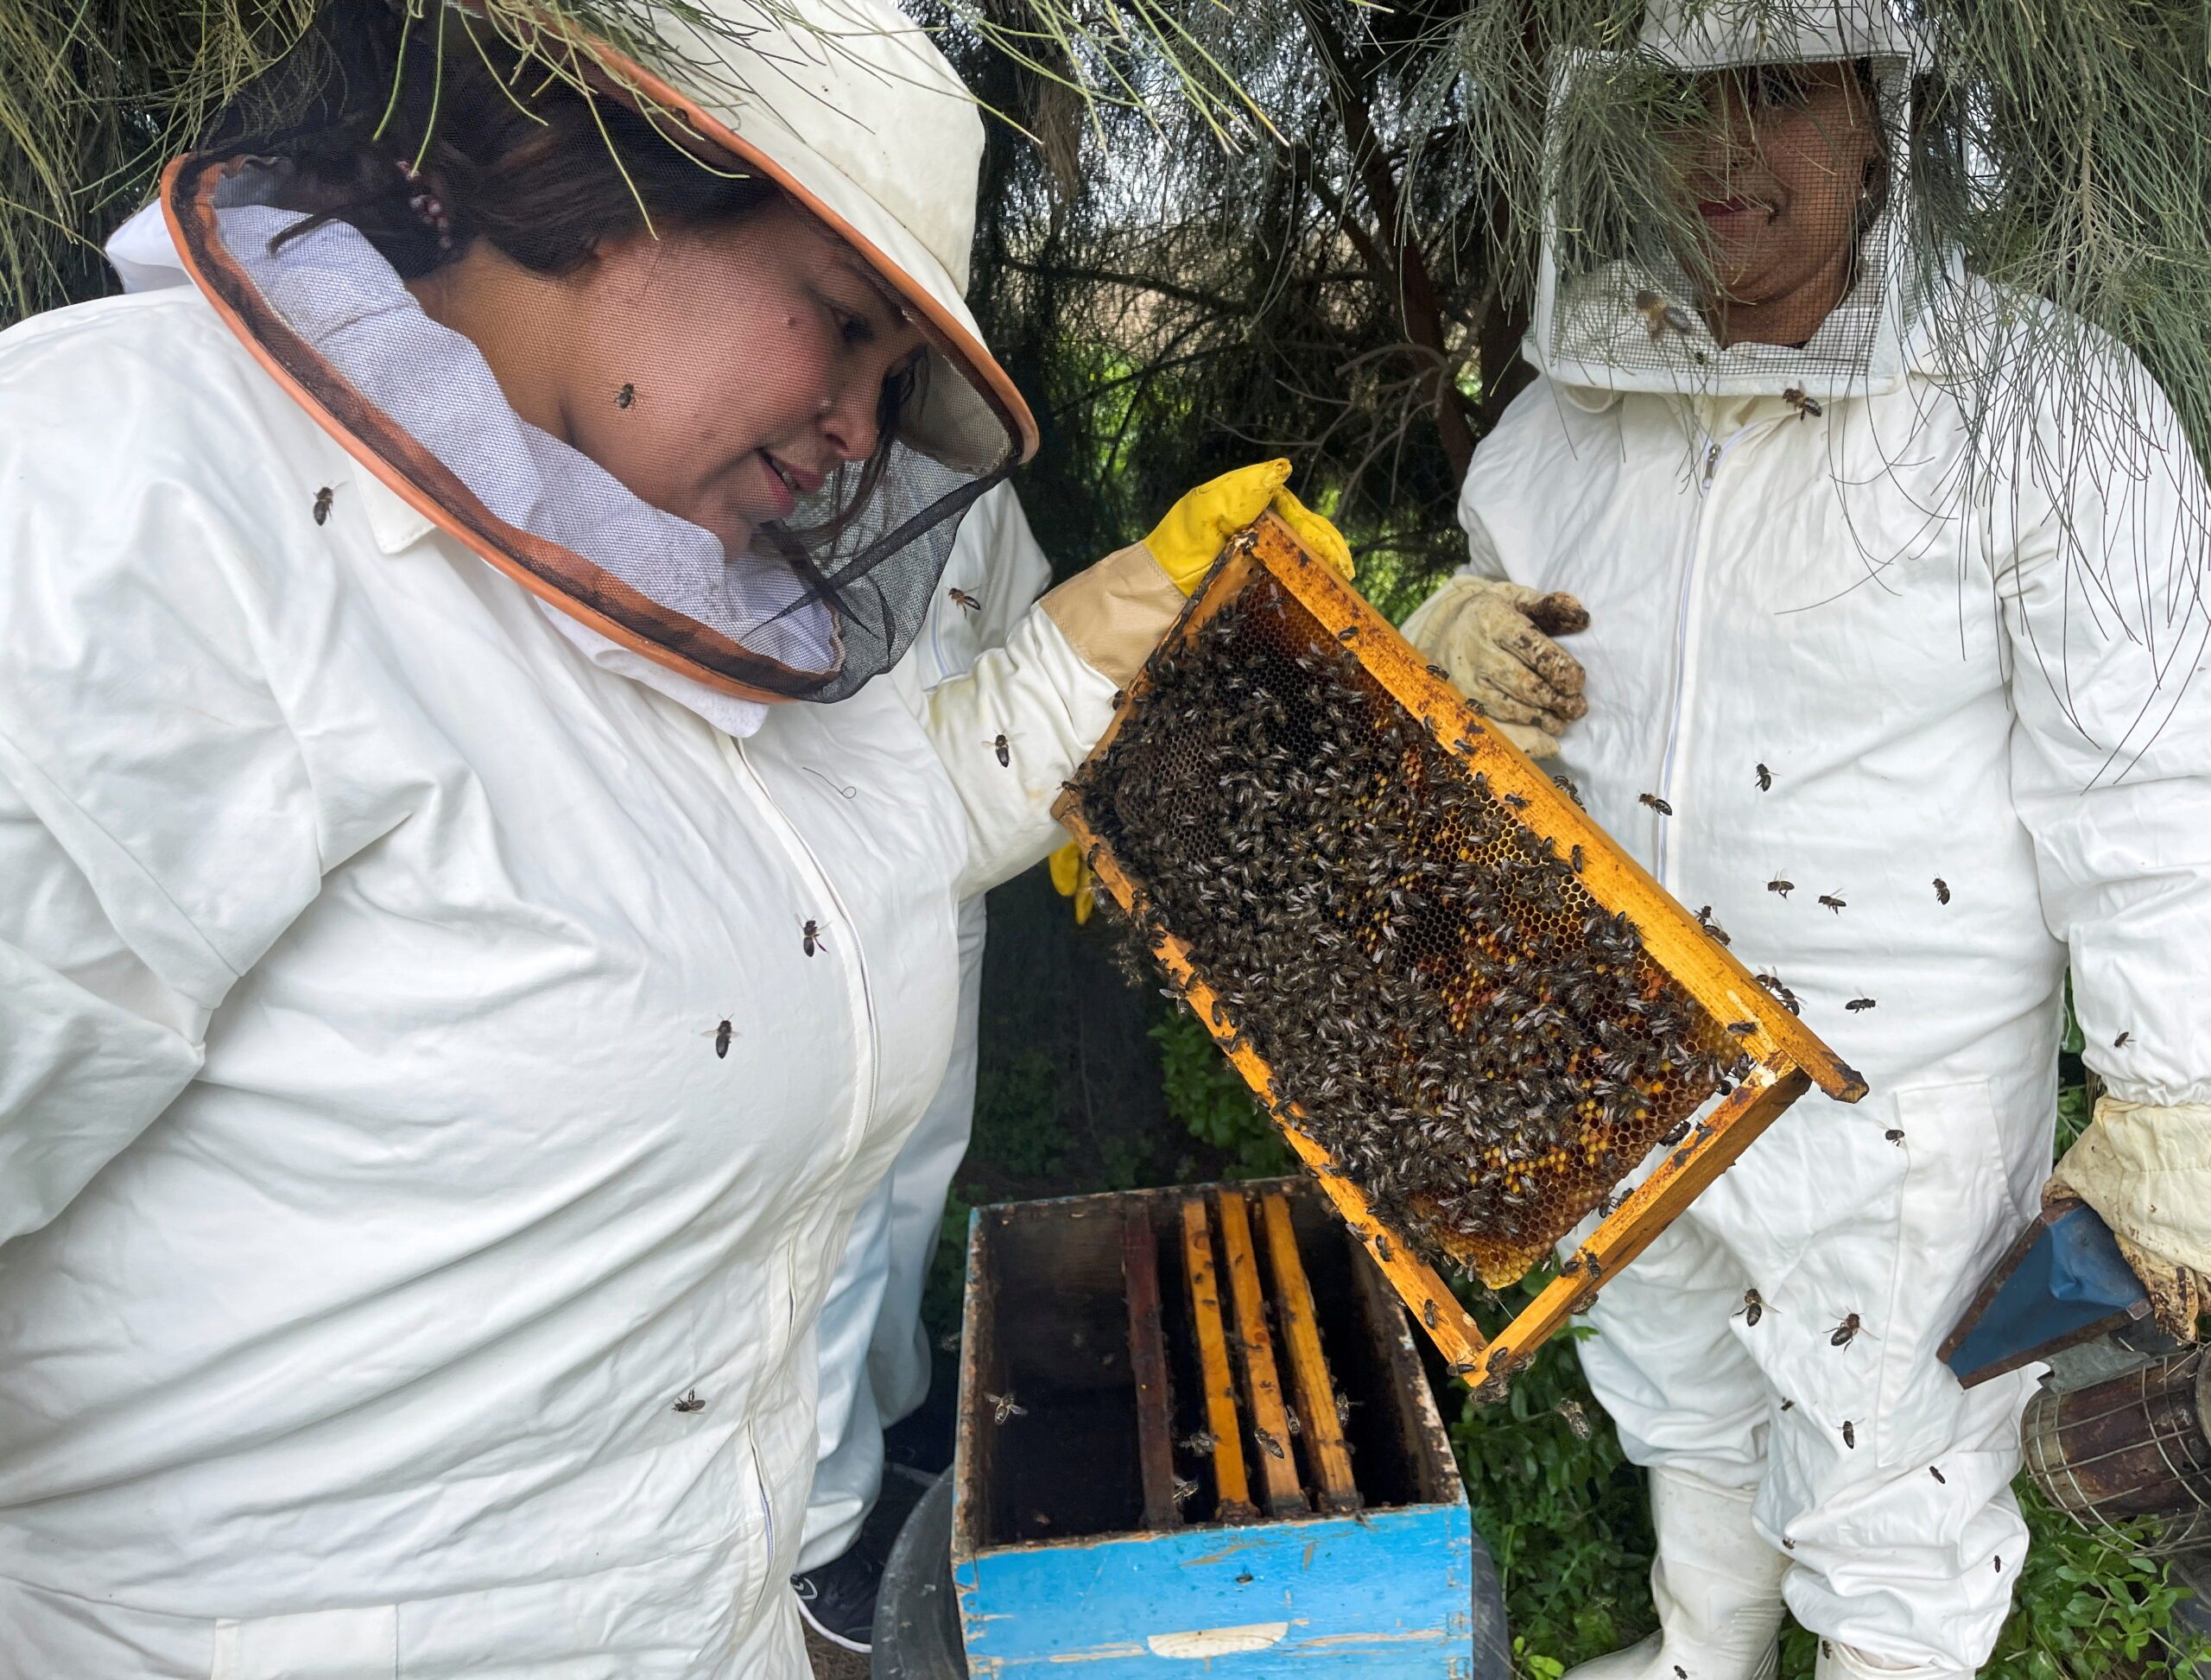 Beekeepers in Mannouba, Tunisia. The country has 305,000 hives